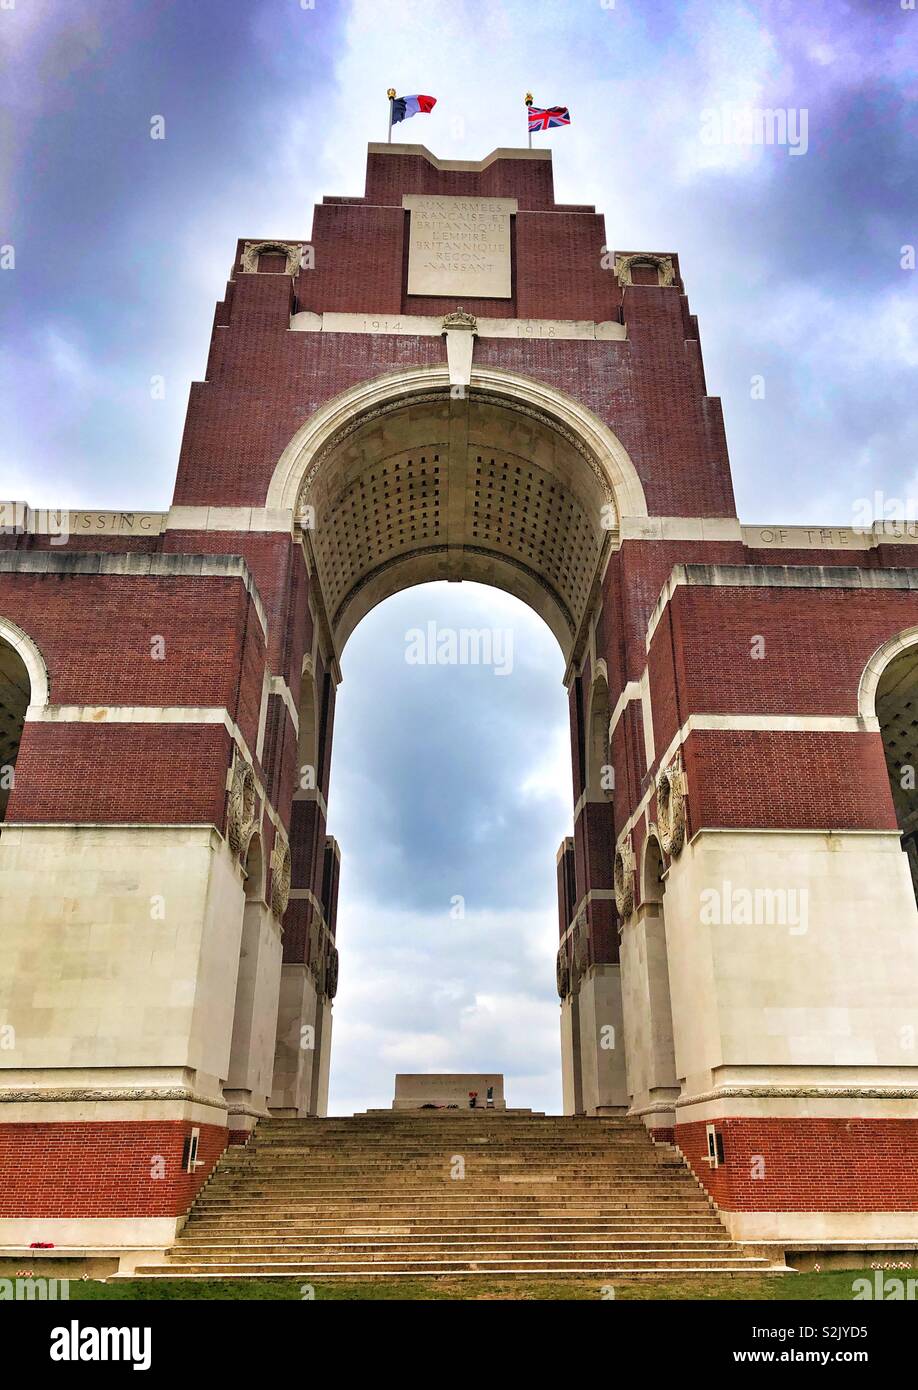 Thiepval Memorial to the missing soldiers of the battle of the Somme 1916. Stock Photo